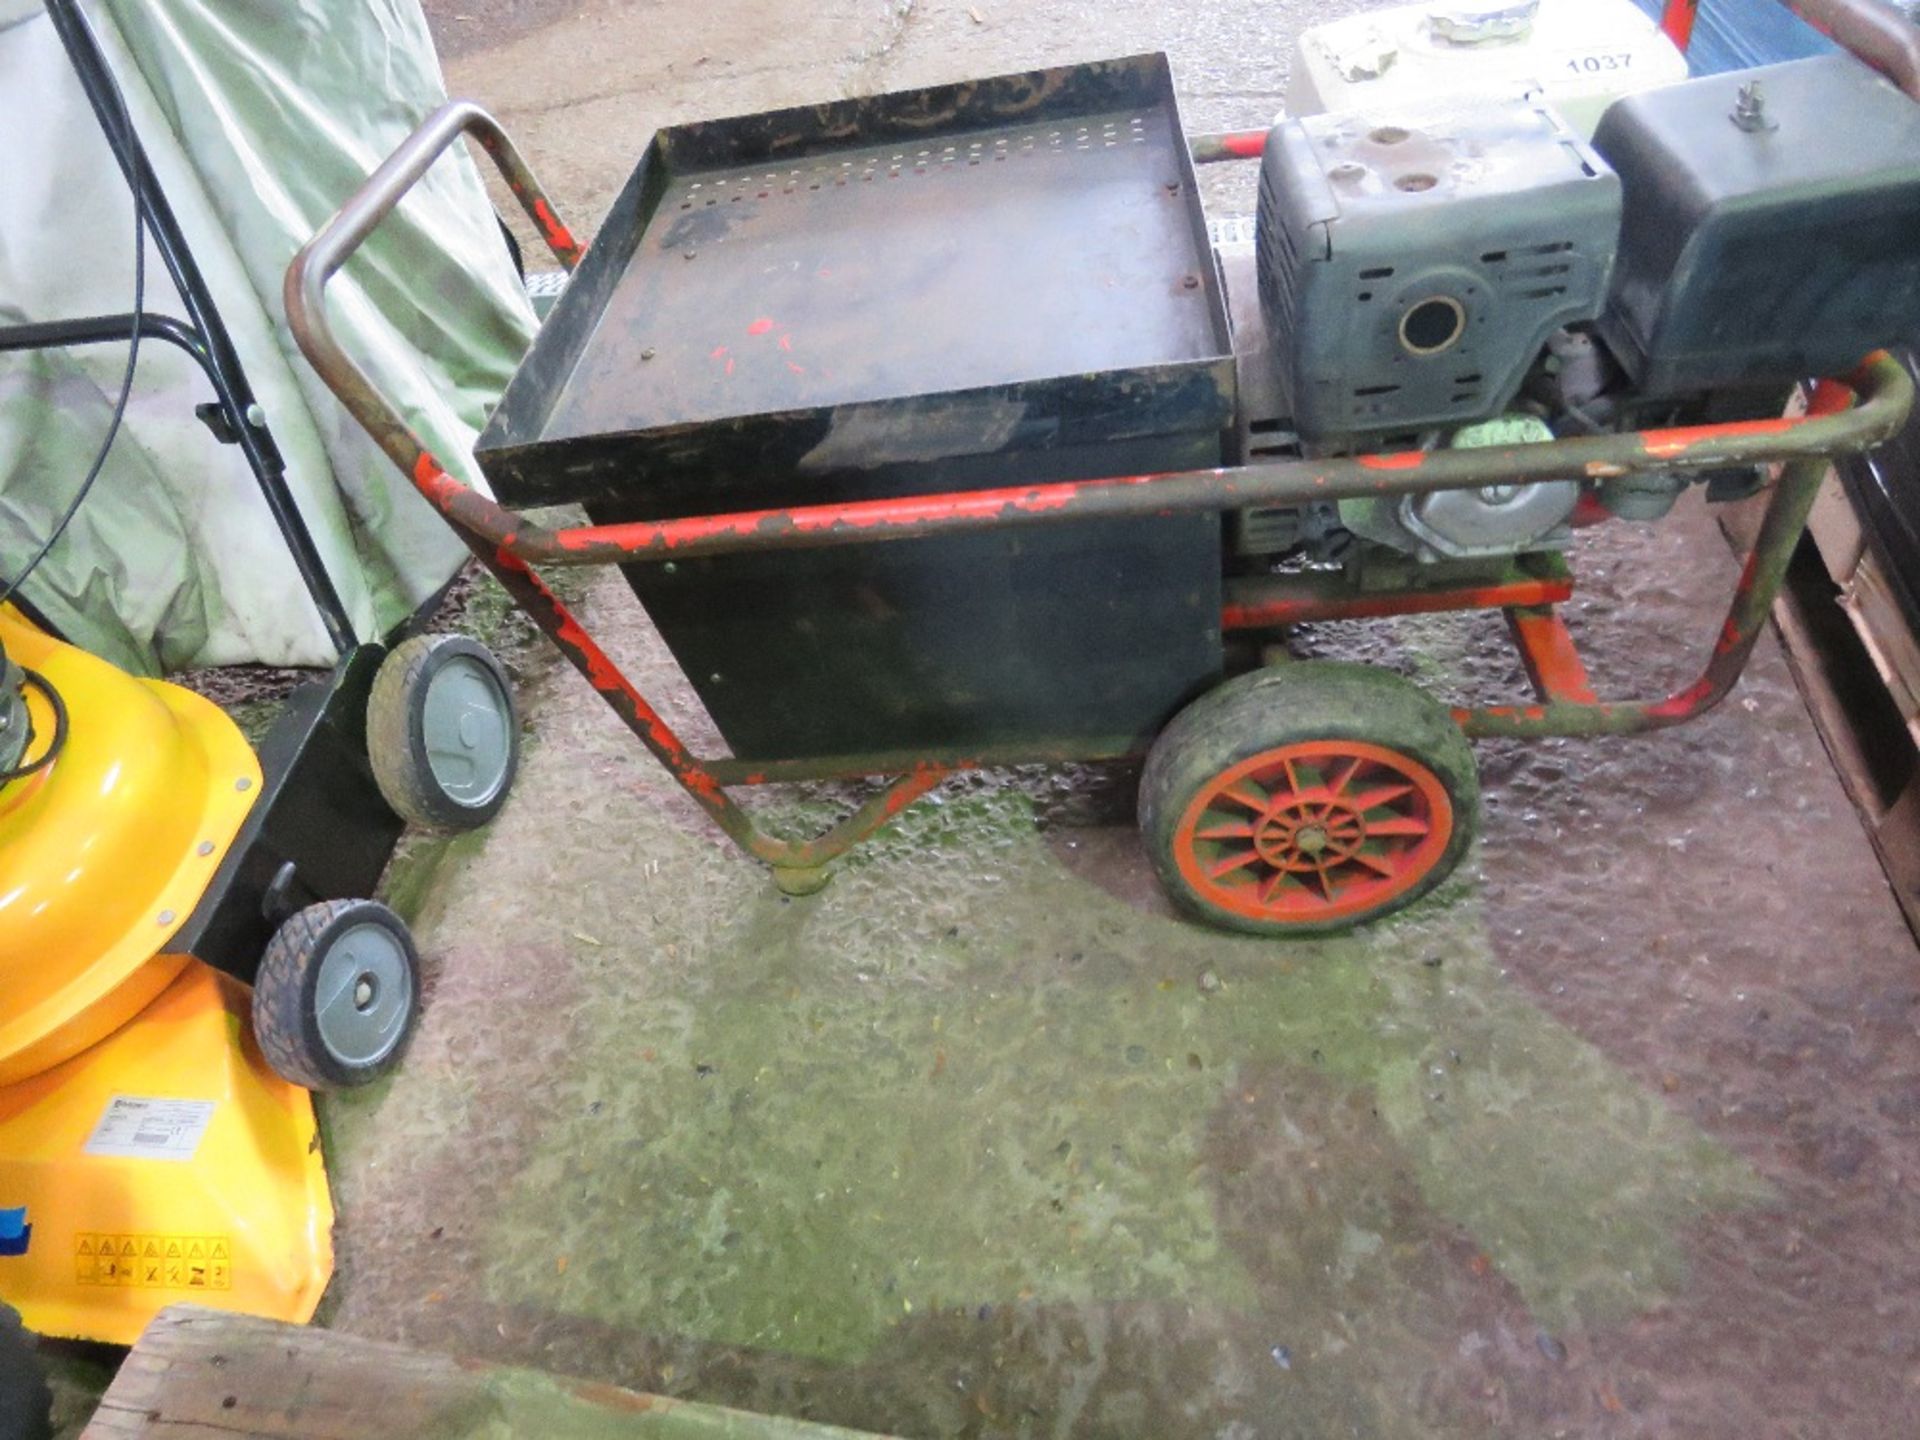 HONDA ENGINED WELDER GENERATOR. WHNE TESTED WAS SEEN TO RUN, OUTPUT UNTESTED. - Image 2 of 4